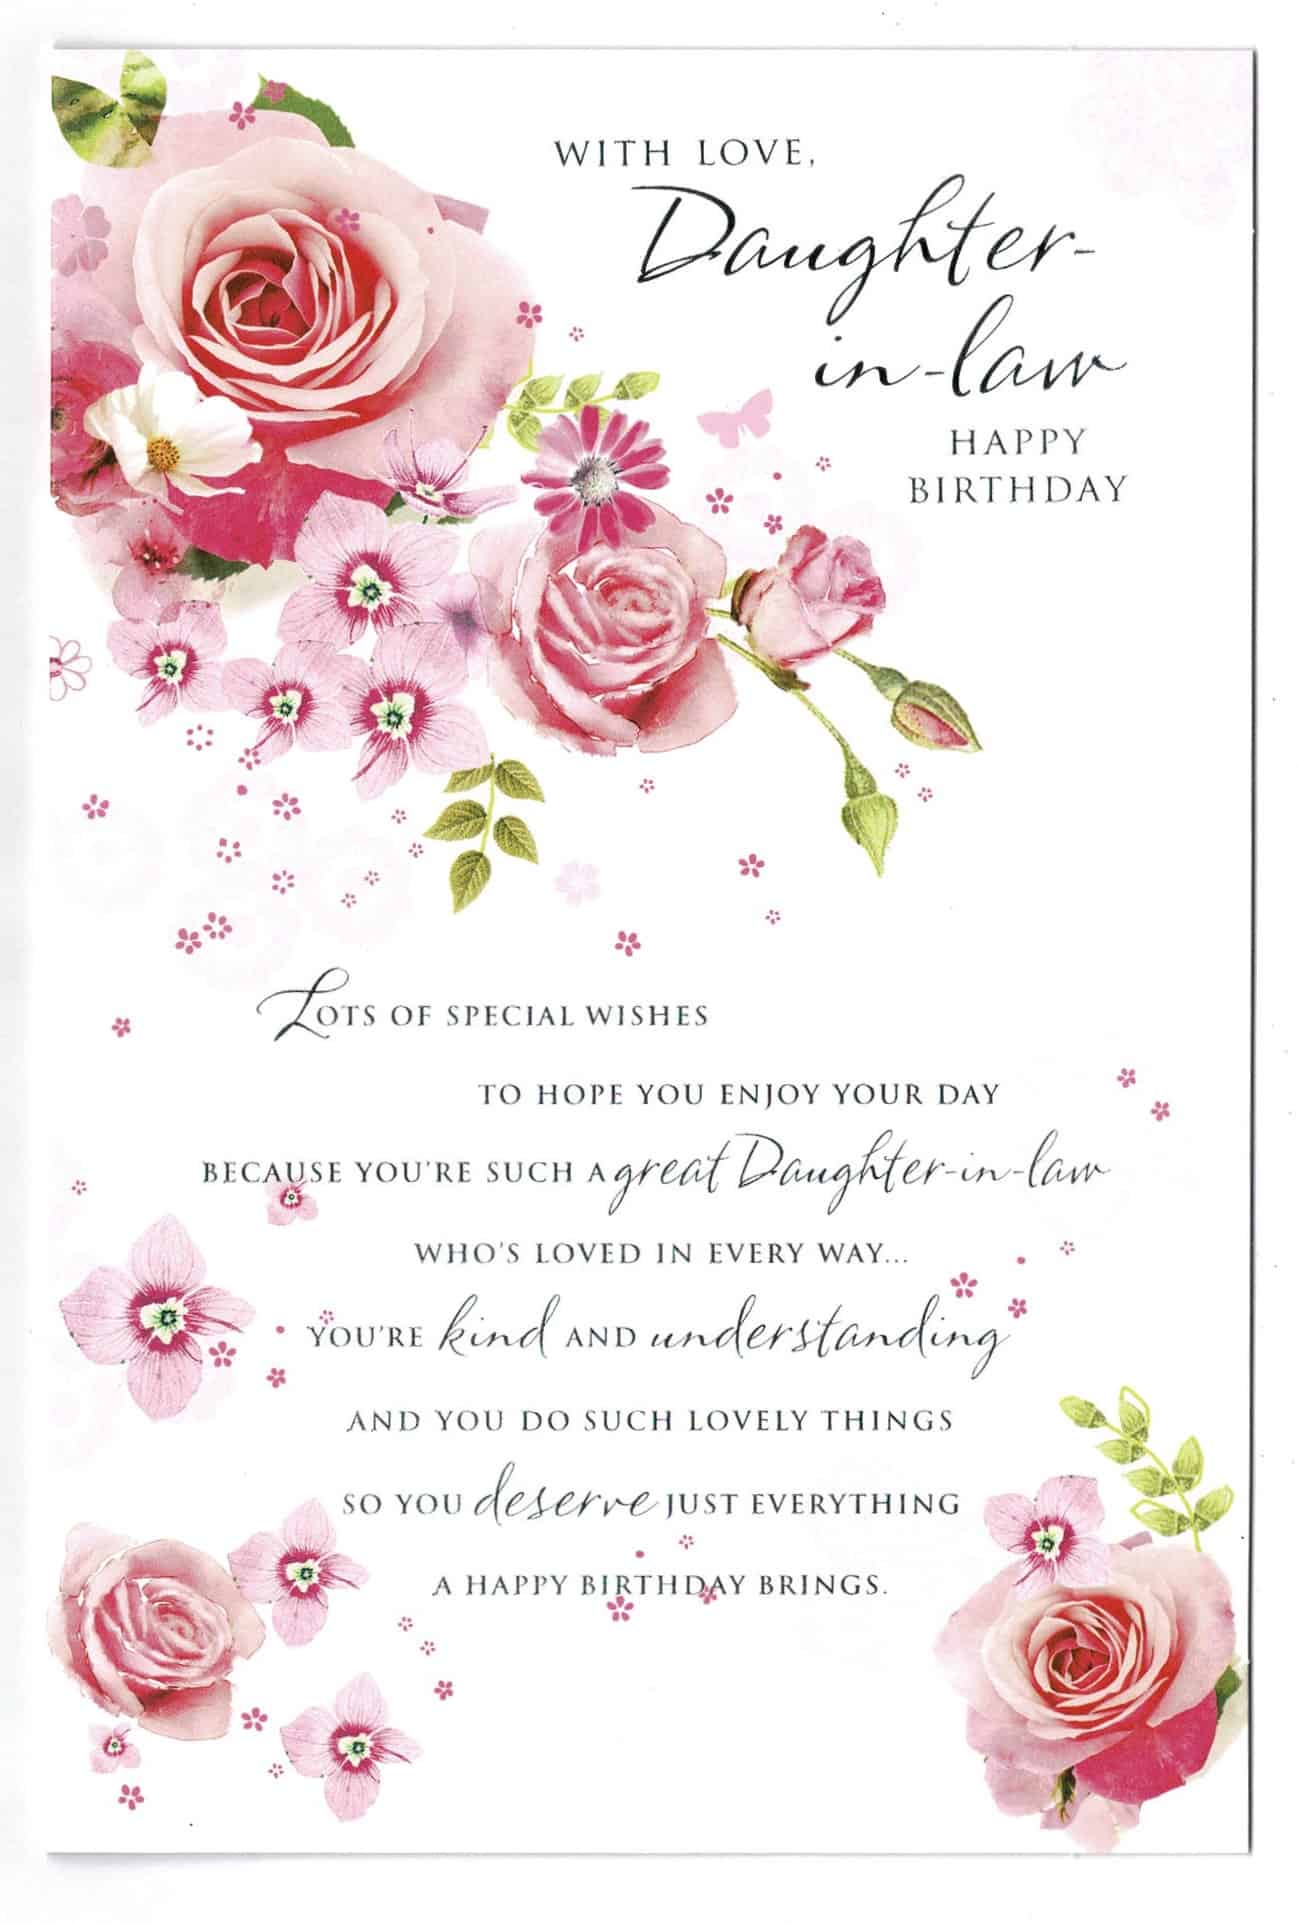 daughter-in-law-birthday-card-with-rose-and-sentiment-verse-design